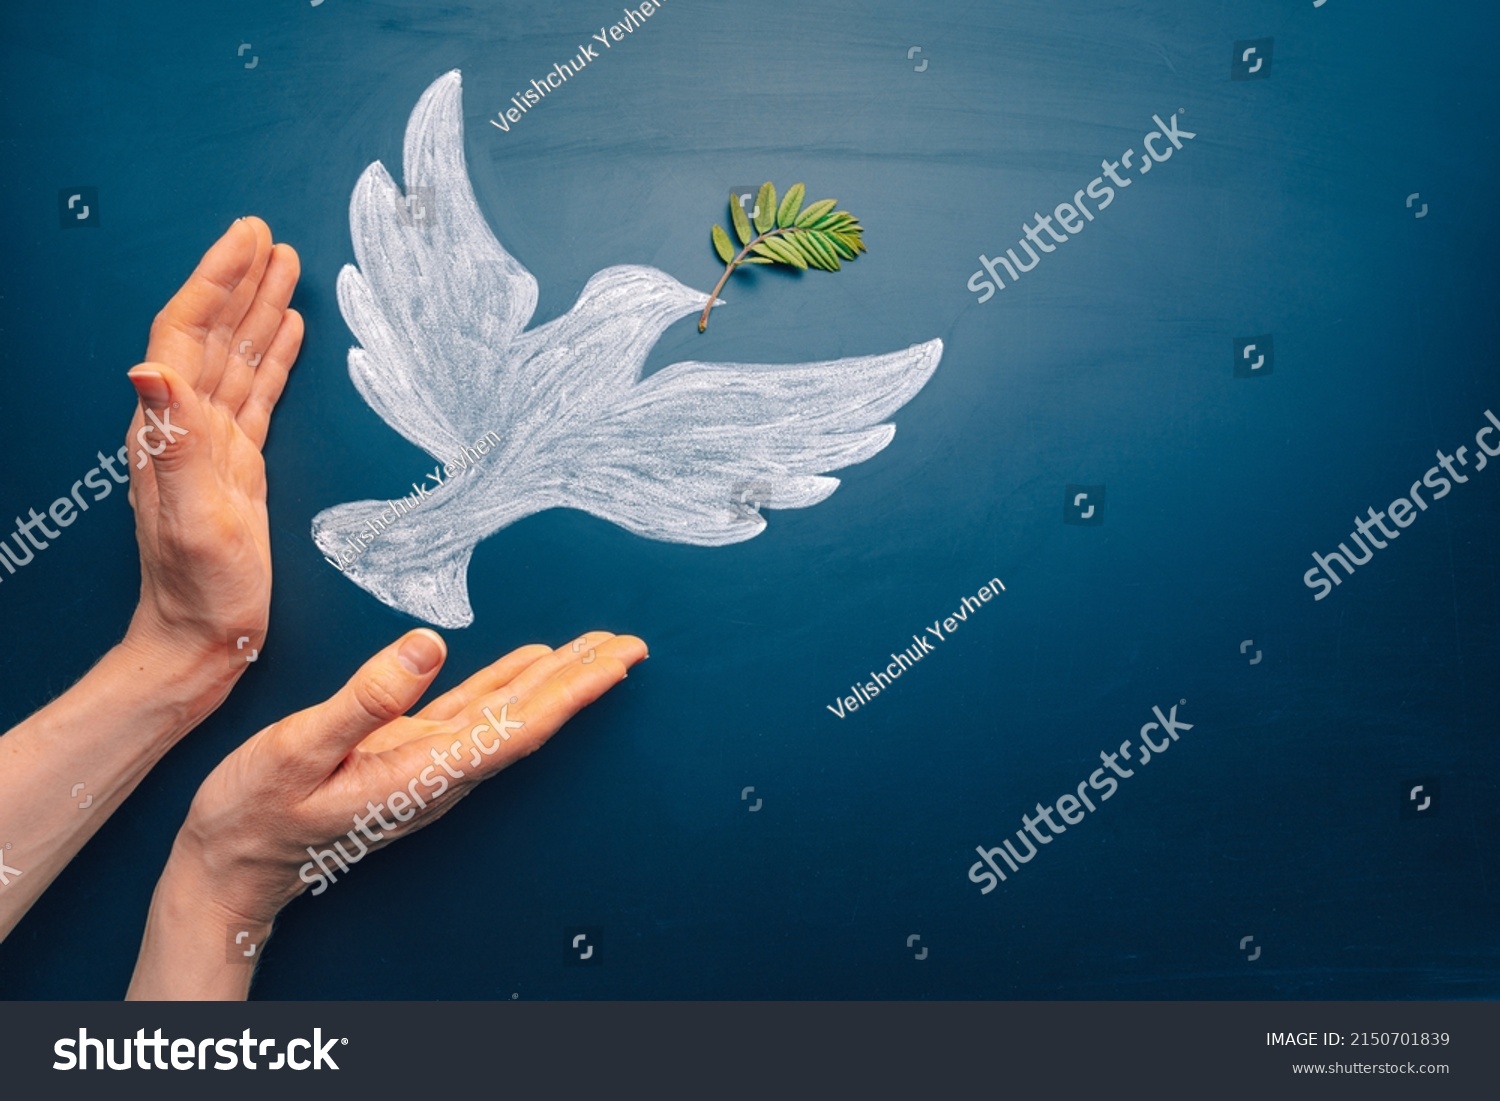 Dove of peace concept. Symbol of freedom and international day of peace. Hands let out chalk painted dove with olive branch #2150701839